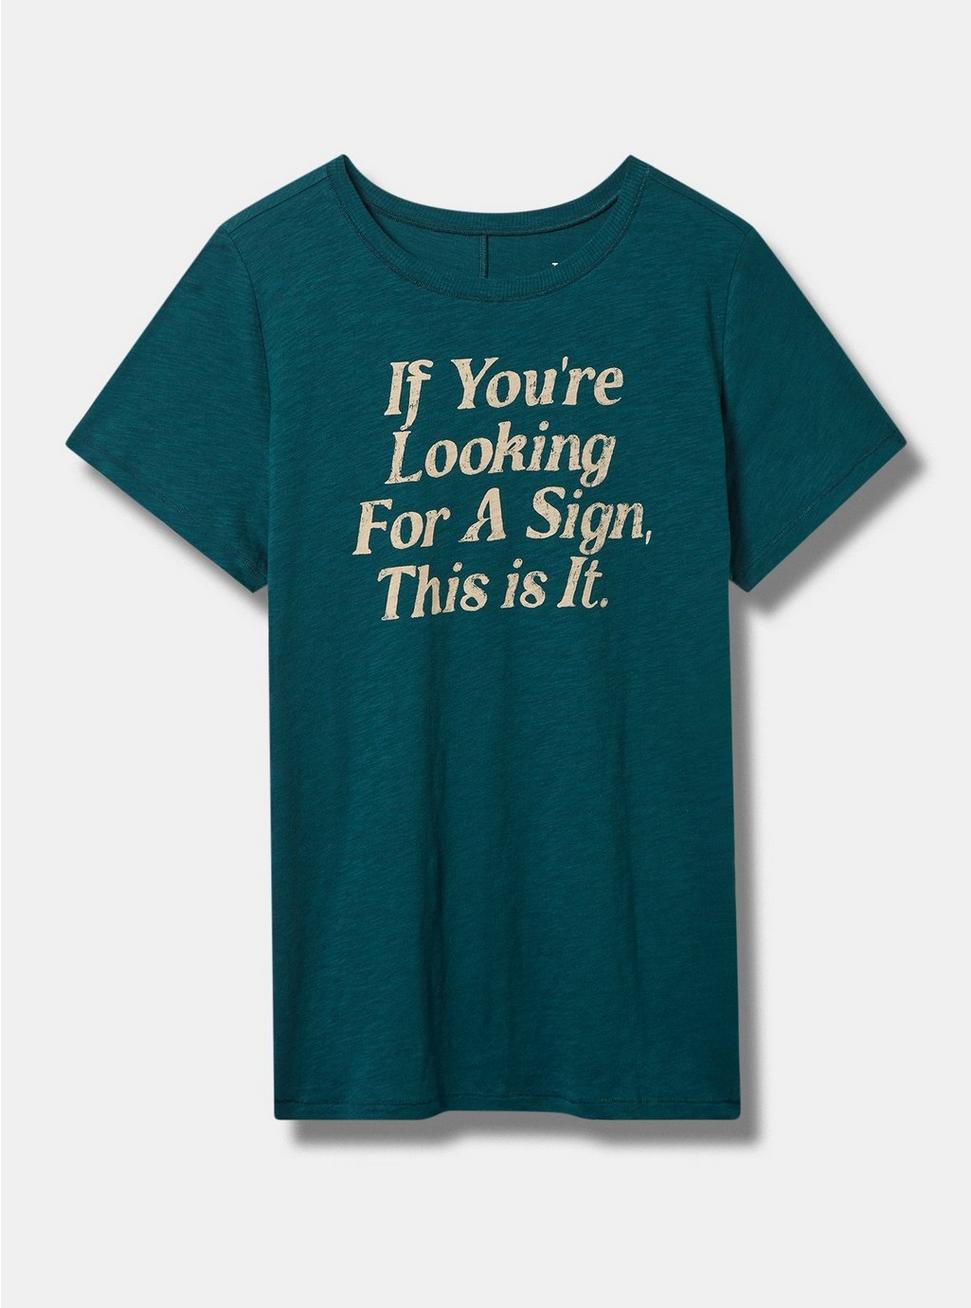 Looking For A Sign Vintage Heritage Crew Neck Tee, DEEP TEAL, hi-res